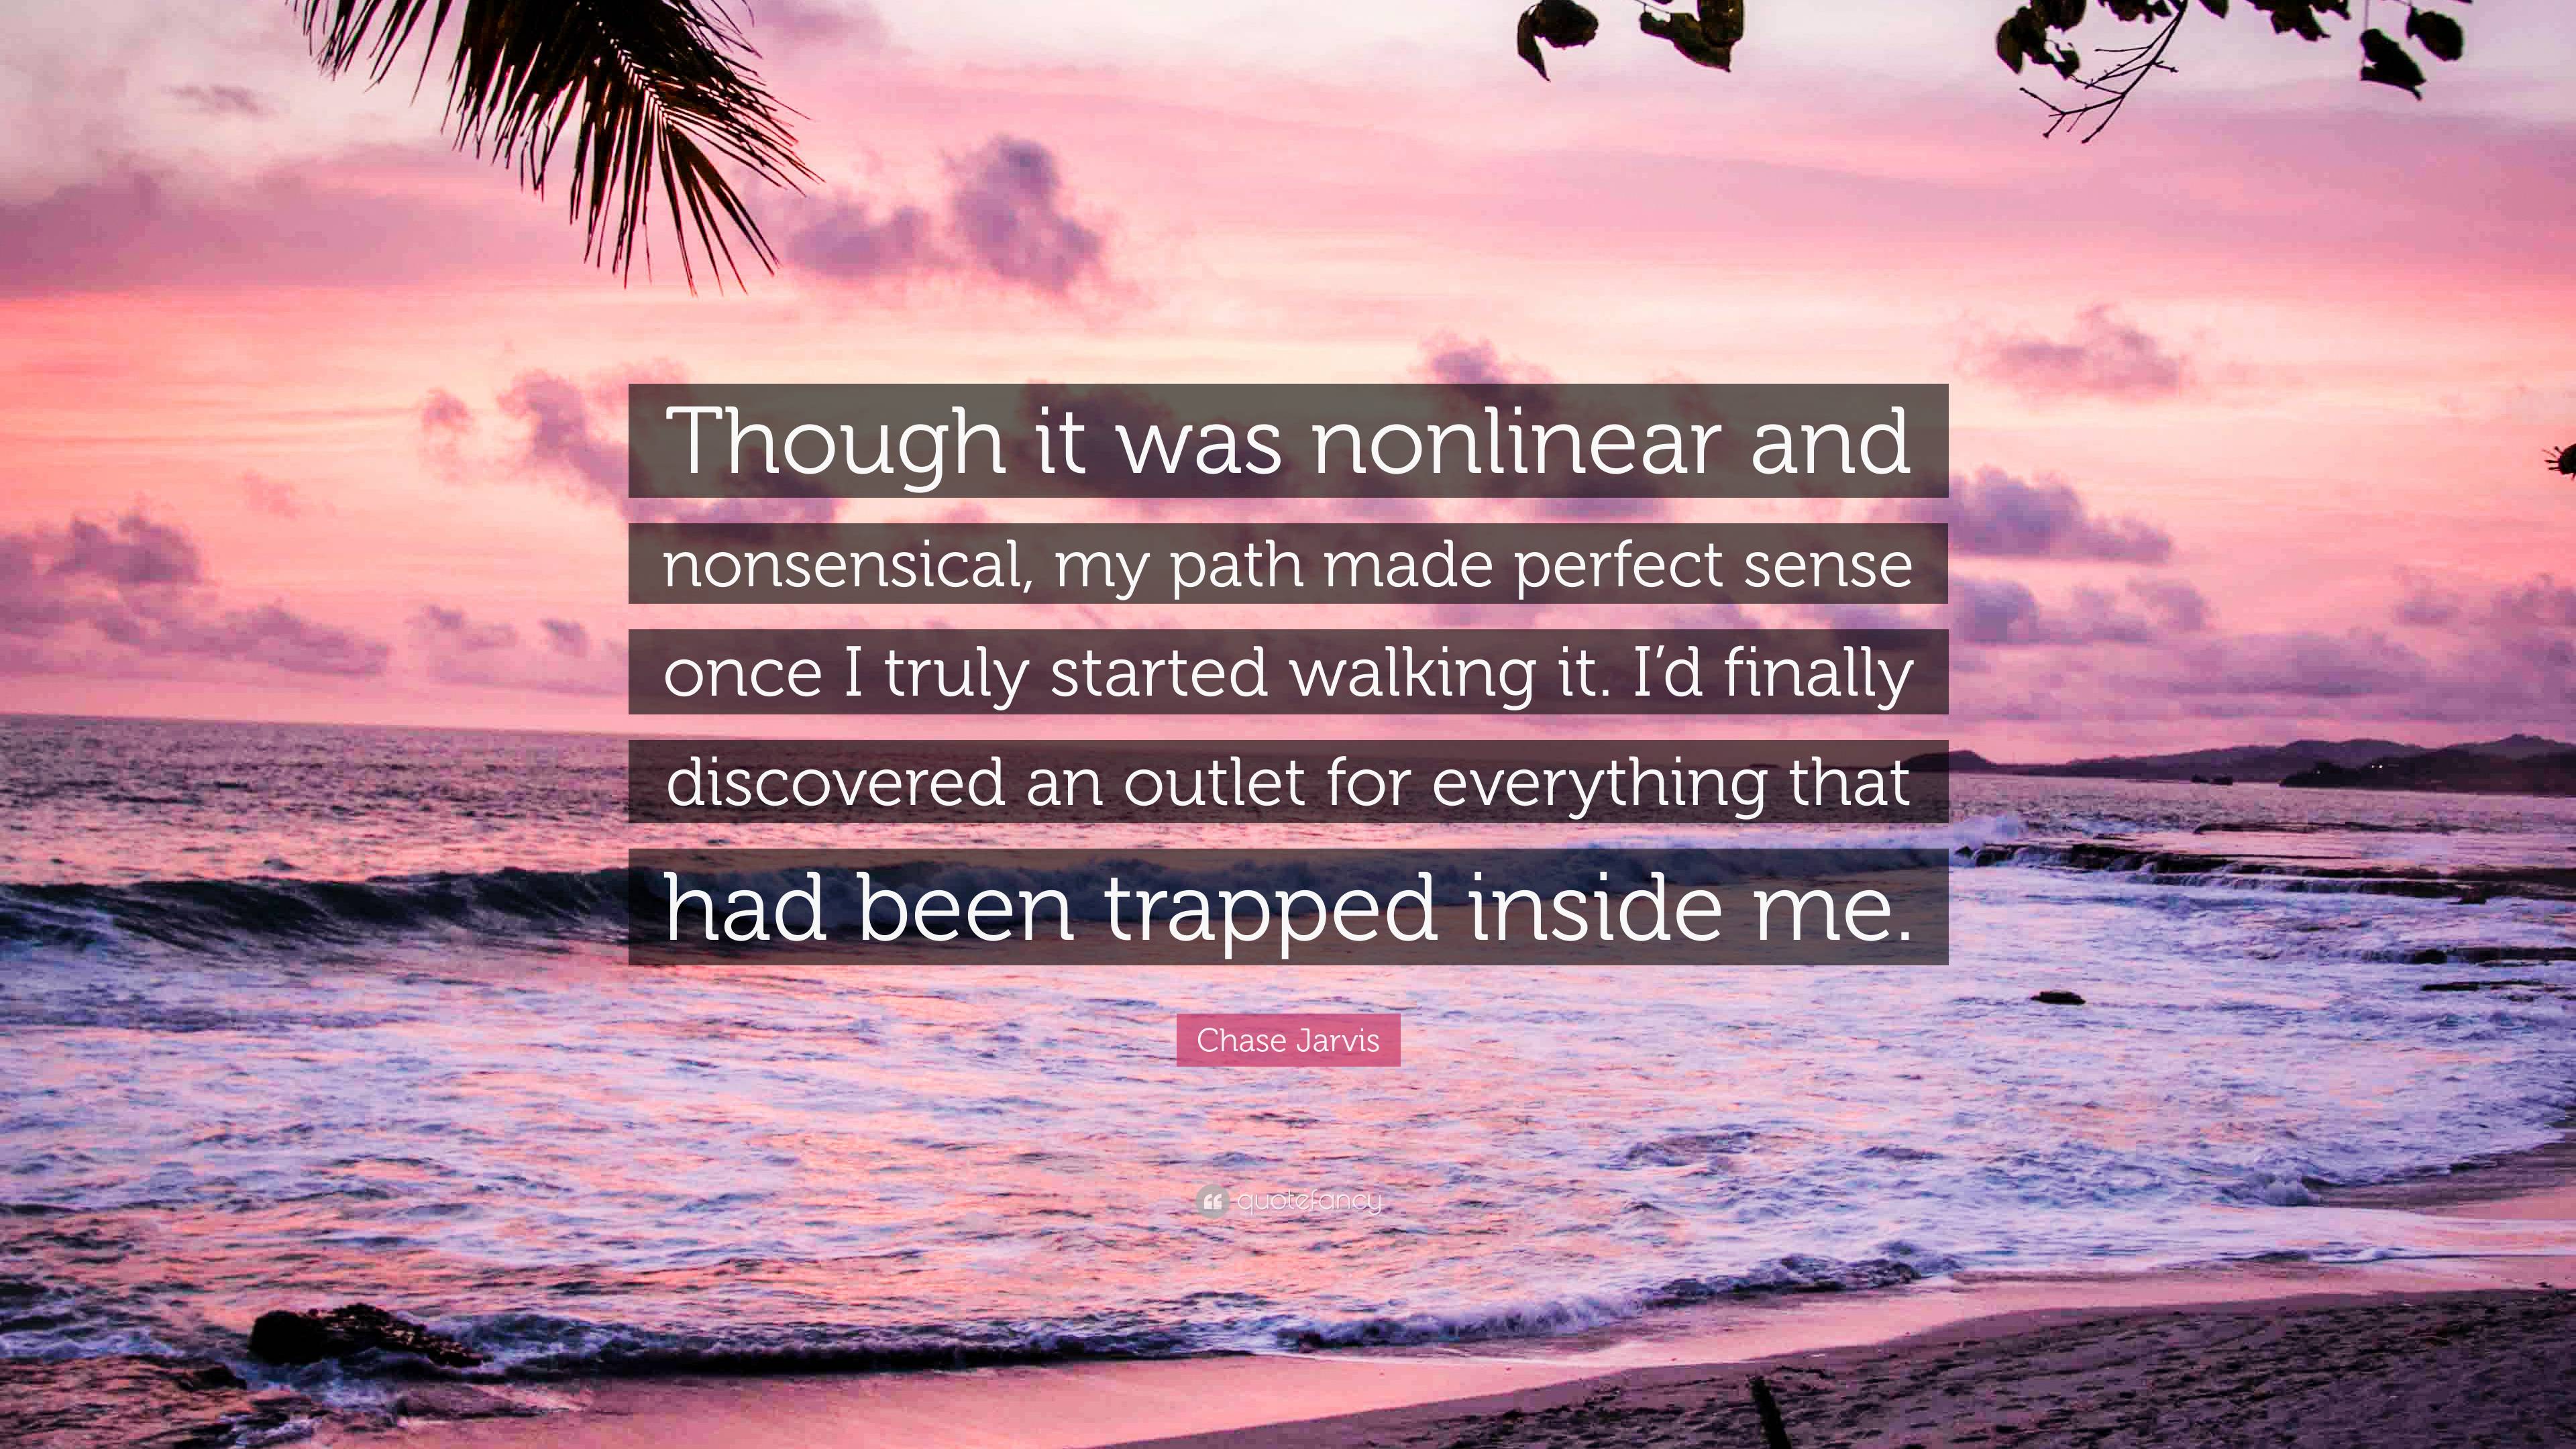 Chase Jarvis Quote: “Though it was nonlinear and nonsensical, my path ...